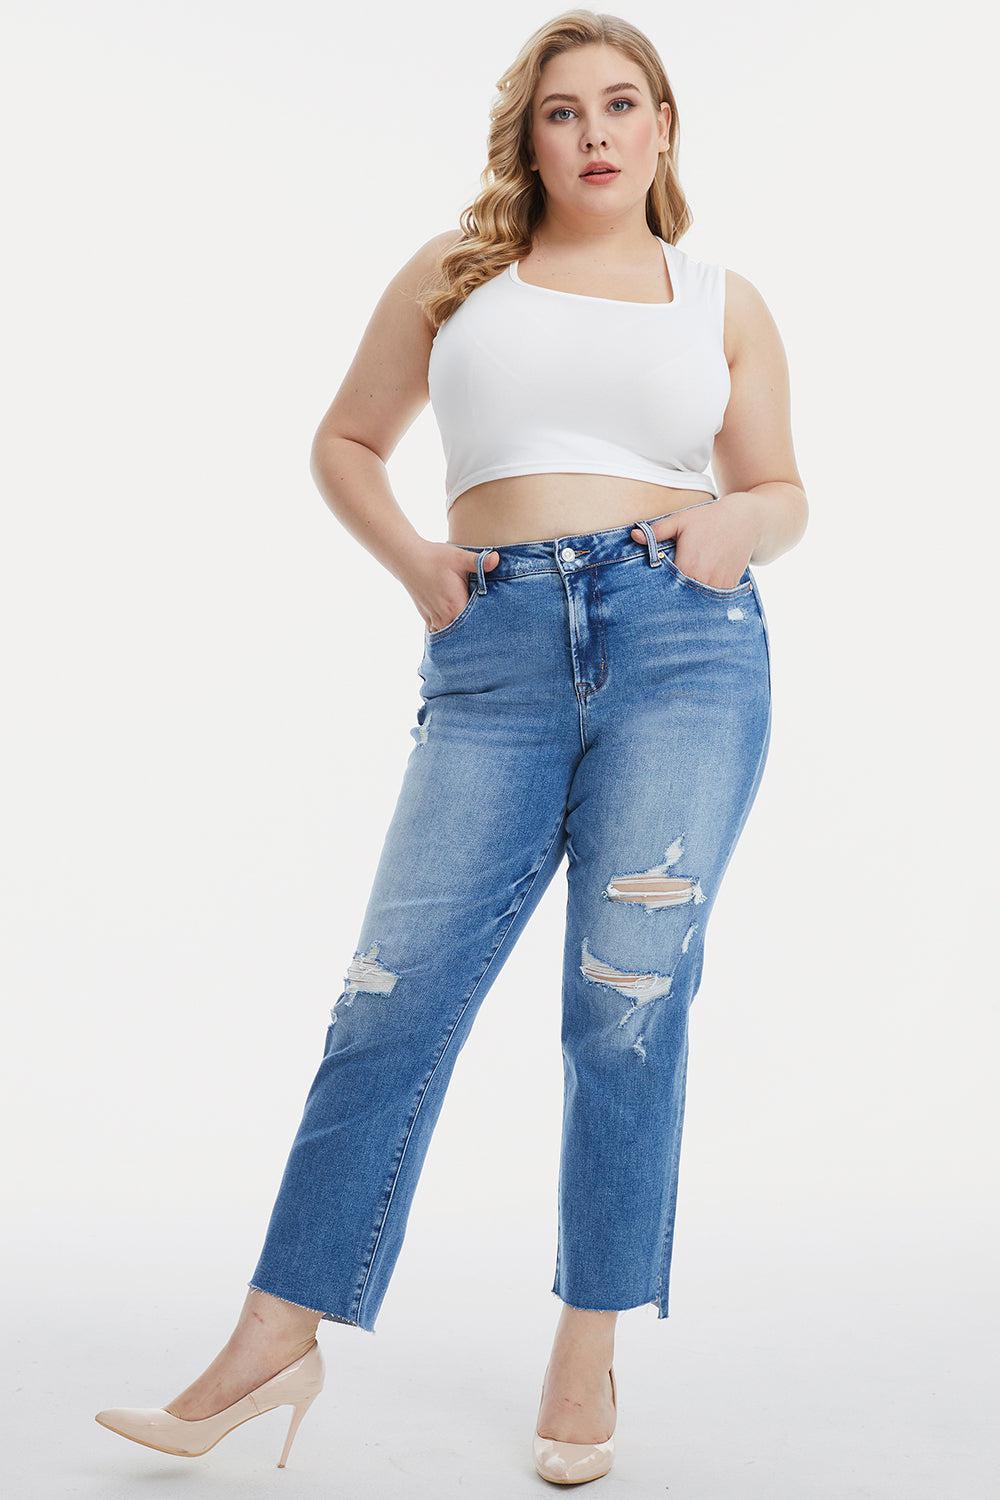 a woman in a white crop top and ripped jeans